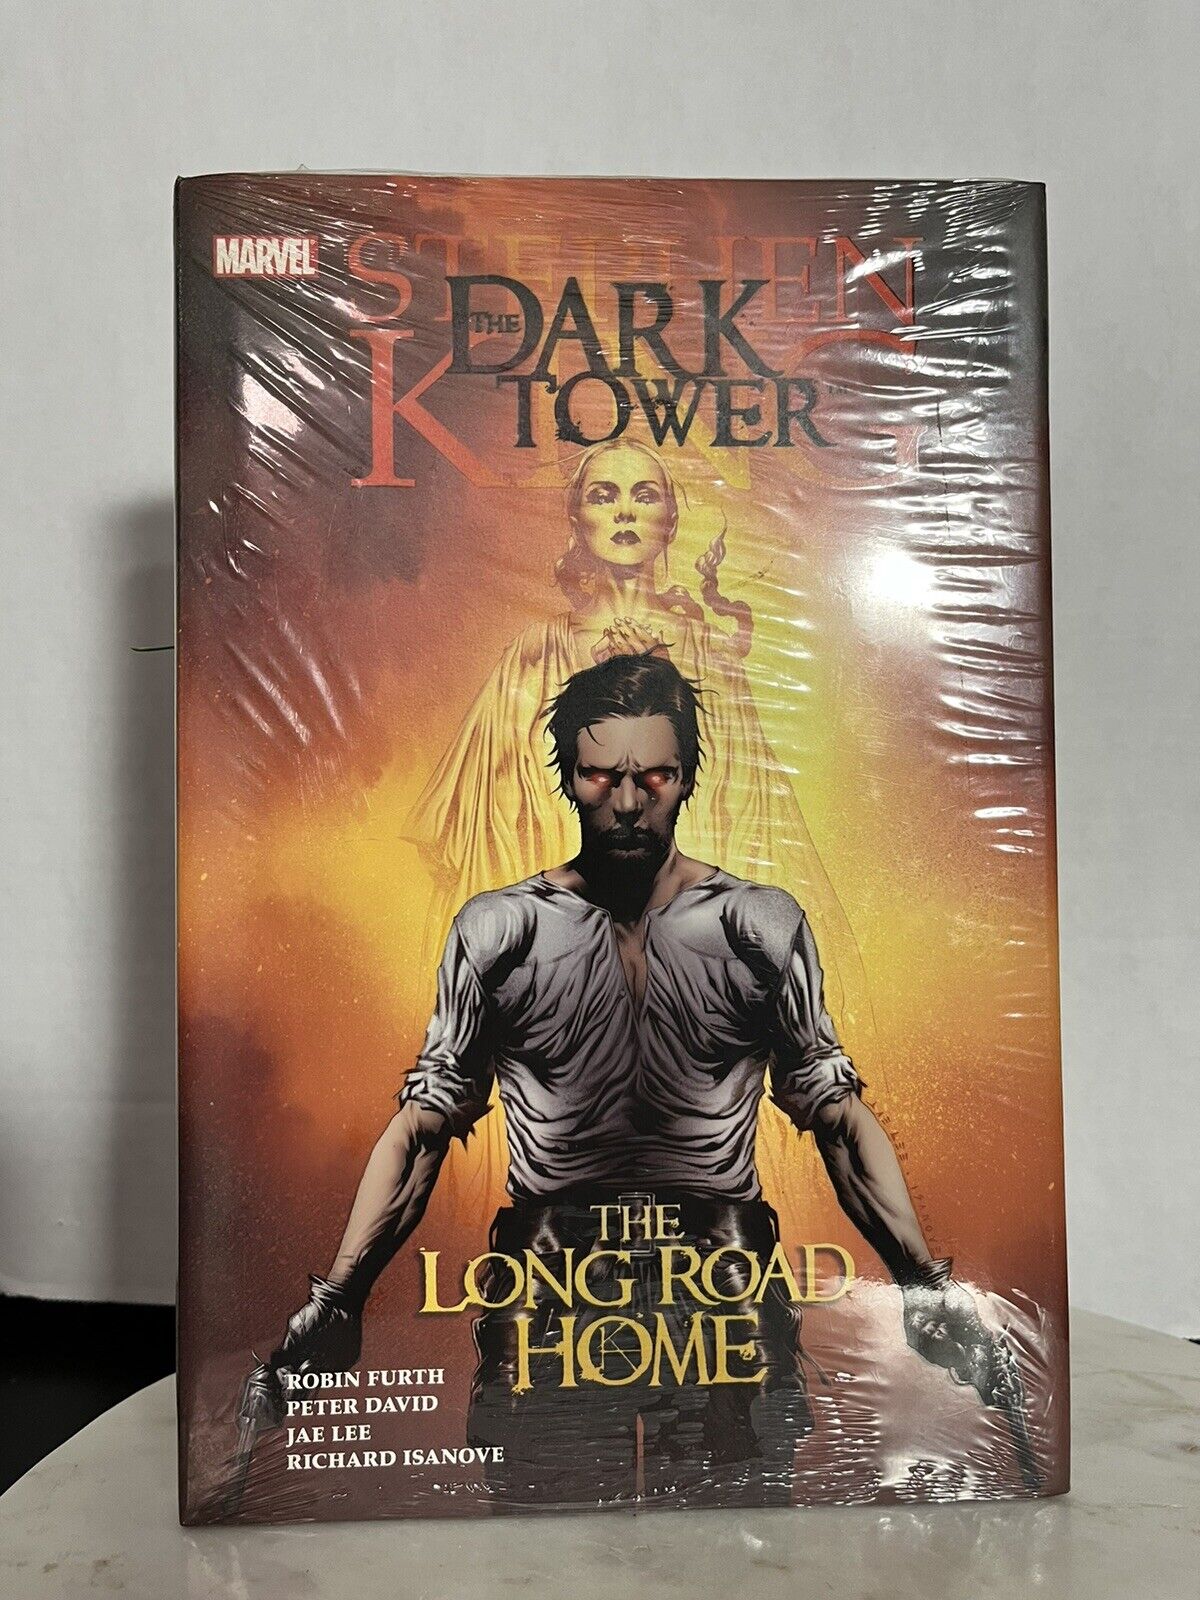 DARK TOWER #1 OF 5 (2008) THE LONG ROAD HOME- STEPHEN KING- MARVEL COMICS NEW!